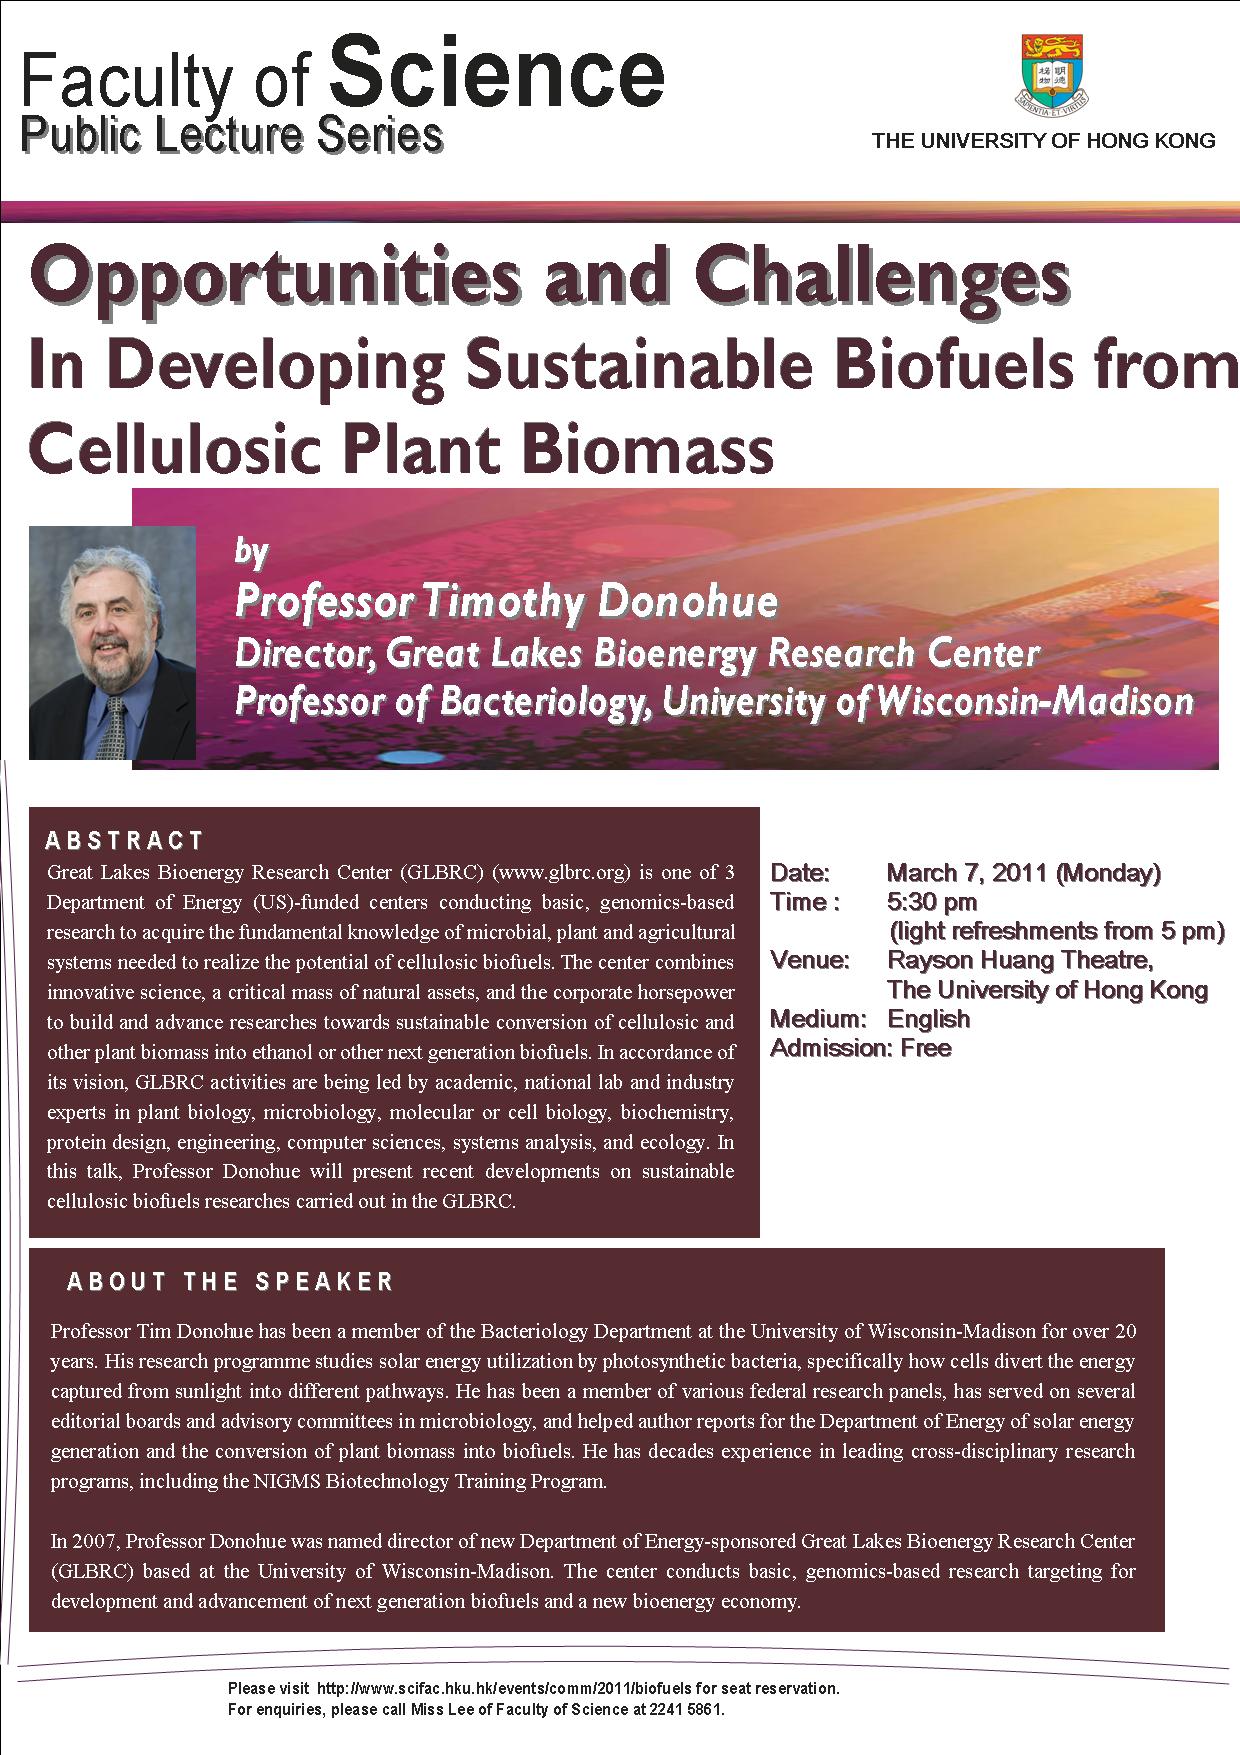 Public lecture : Opportunities and Challenges In Developing Sustainable Biofuels from Cellulosic Plant Biomass